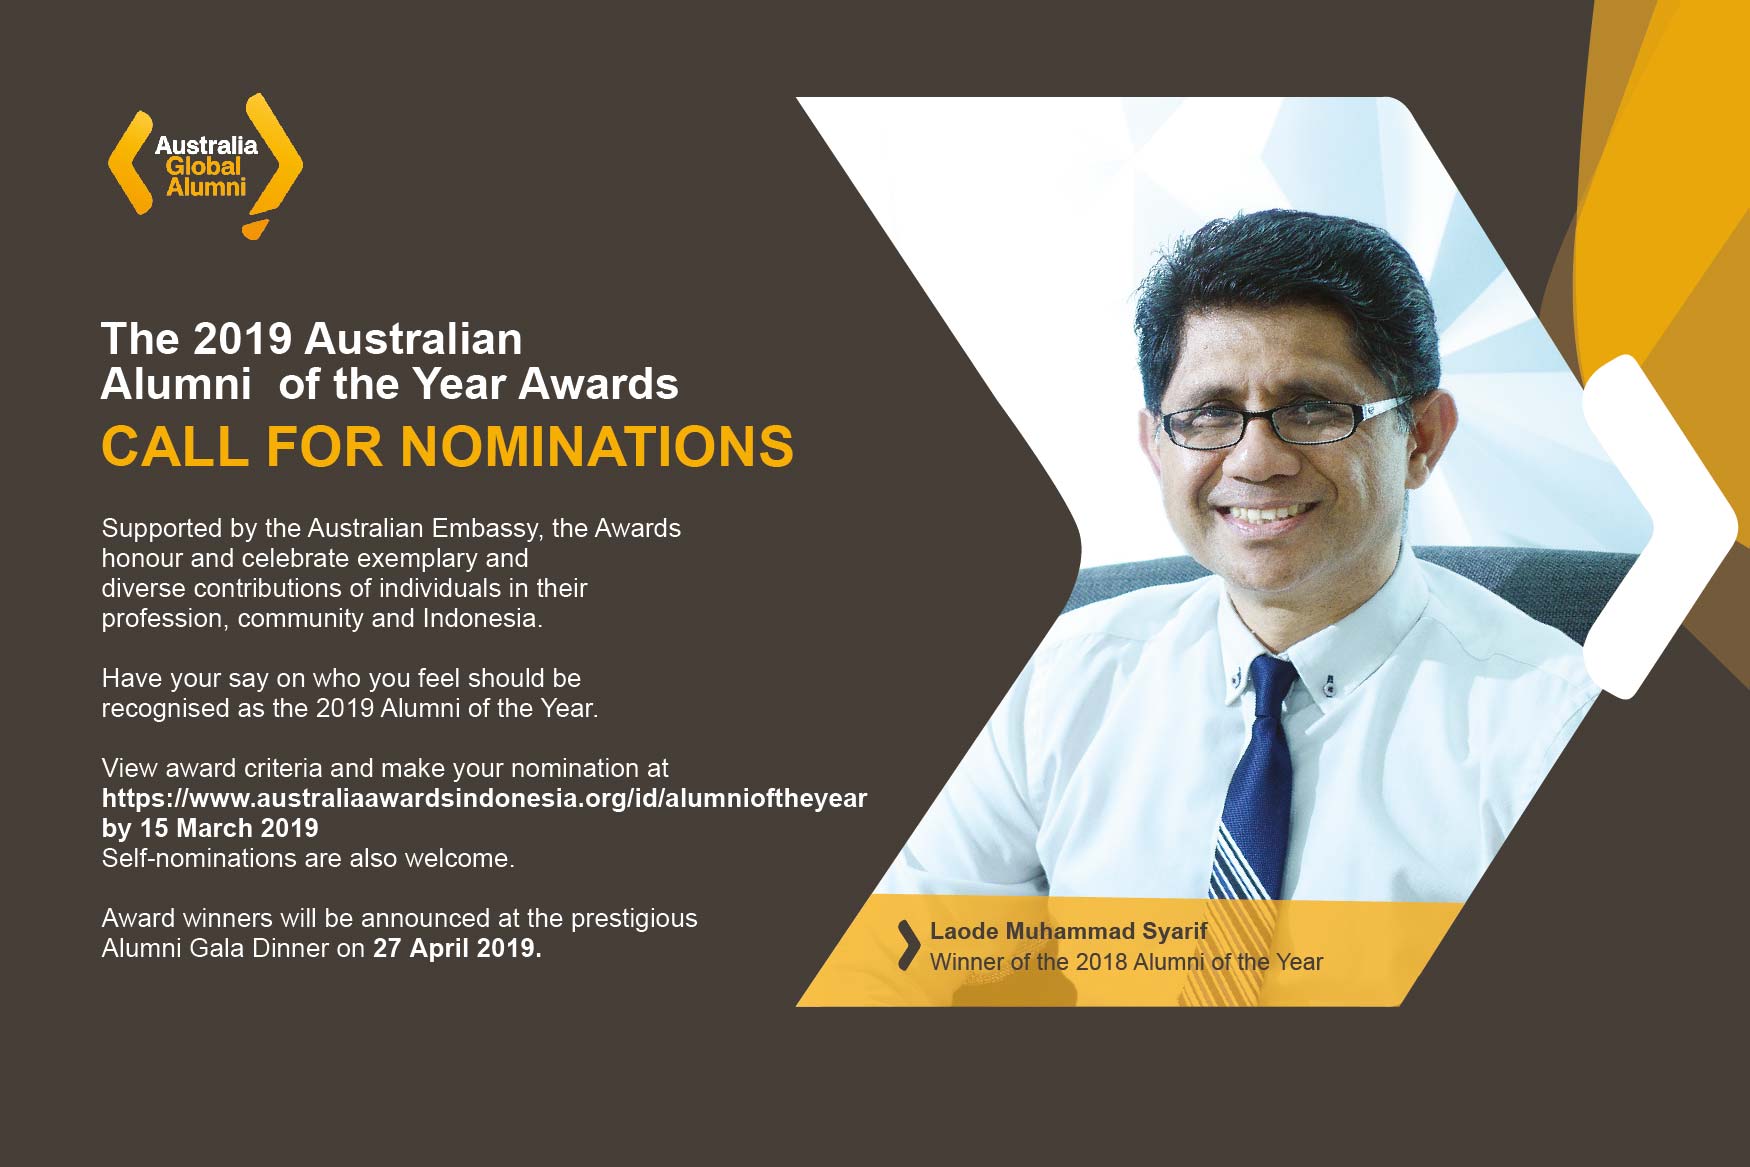 Call for Nominations: The 2019 Australian Alumni of the Year Awards!